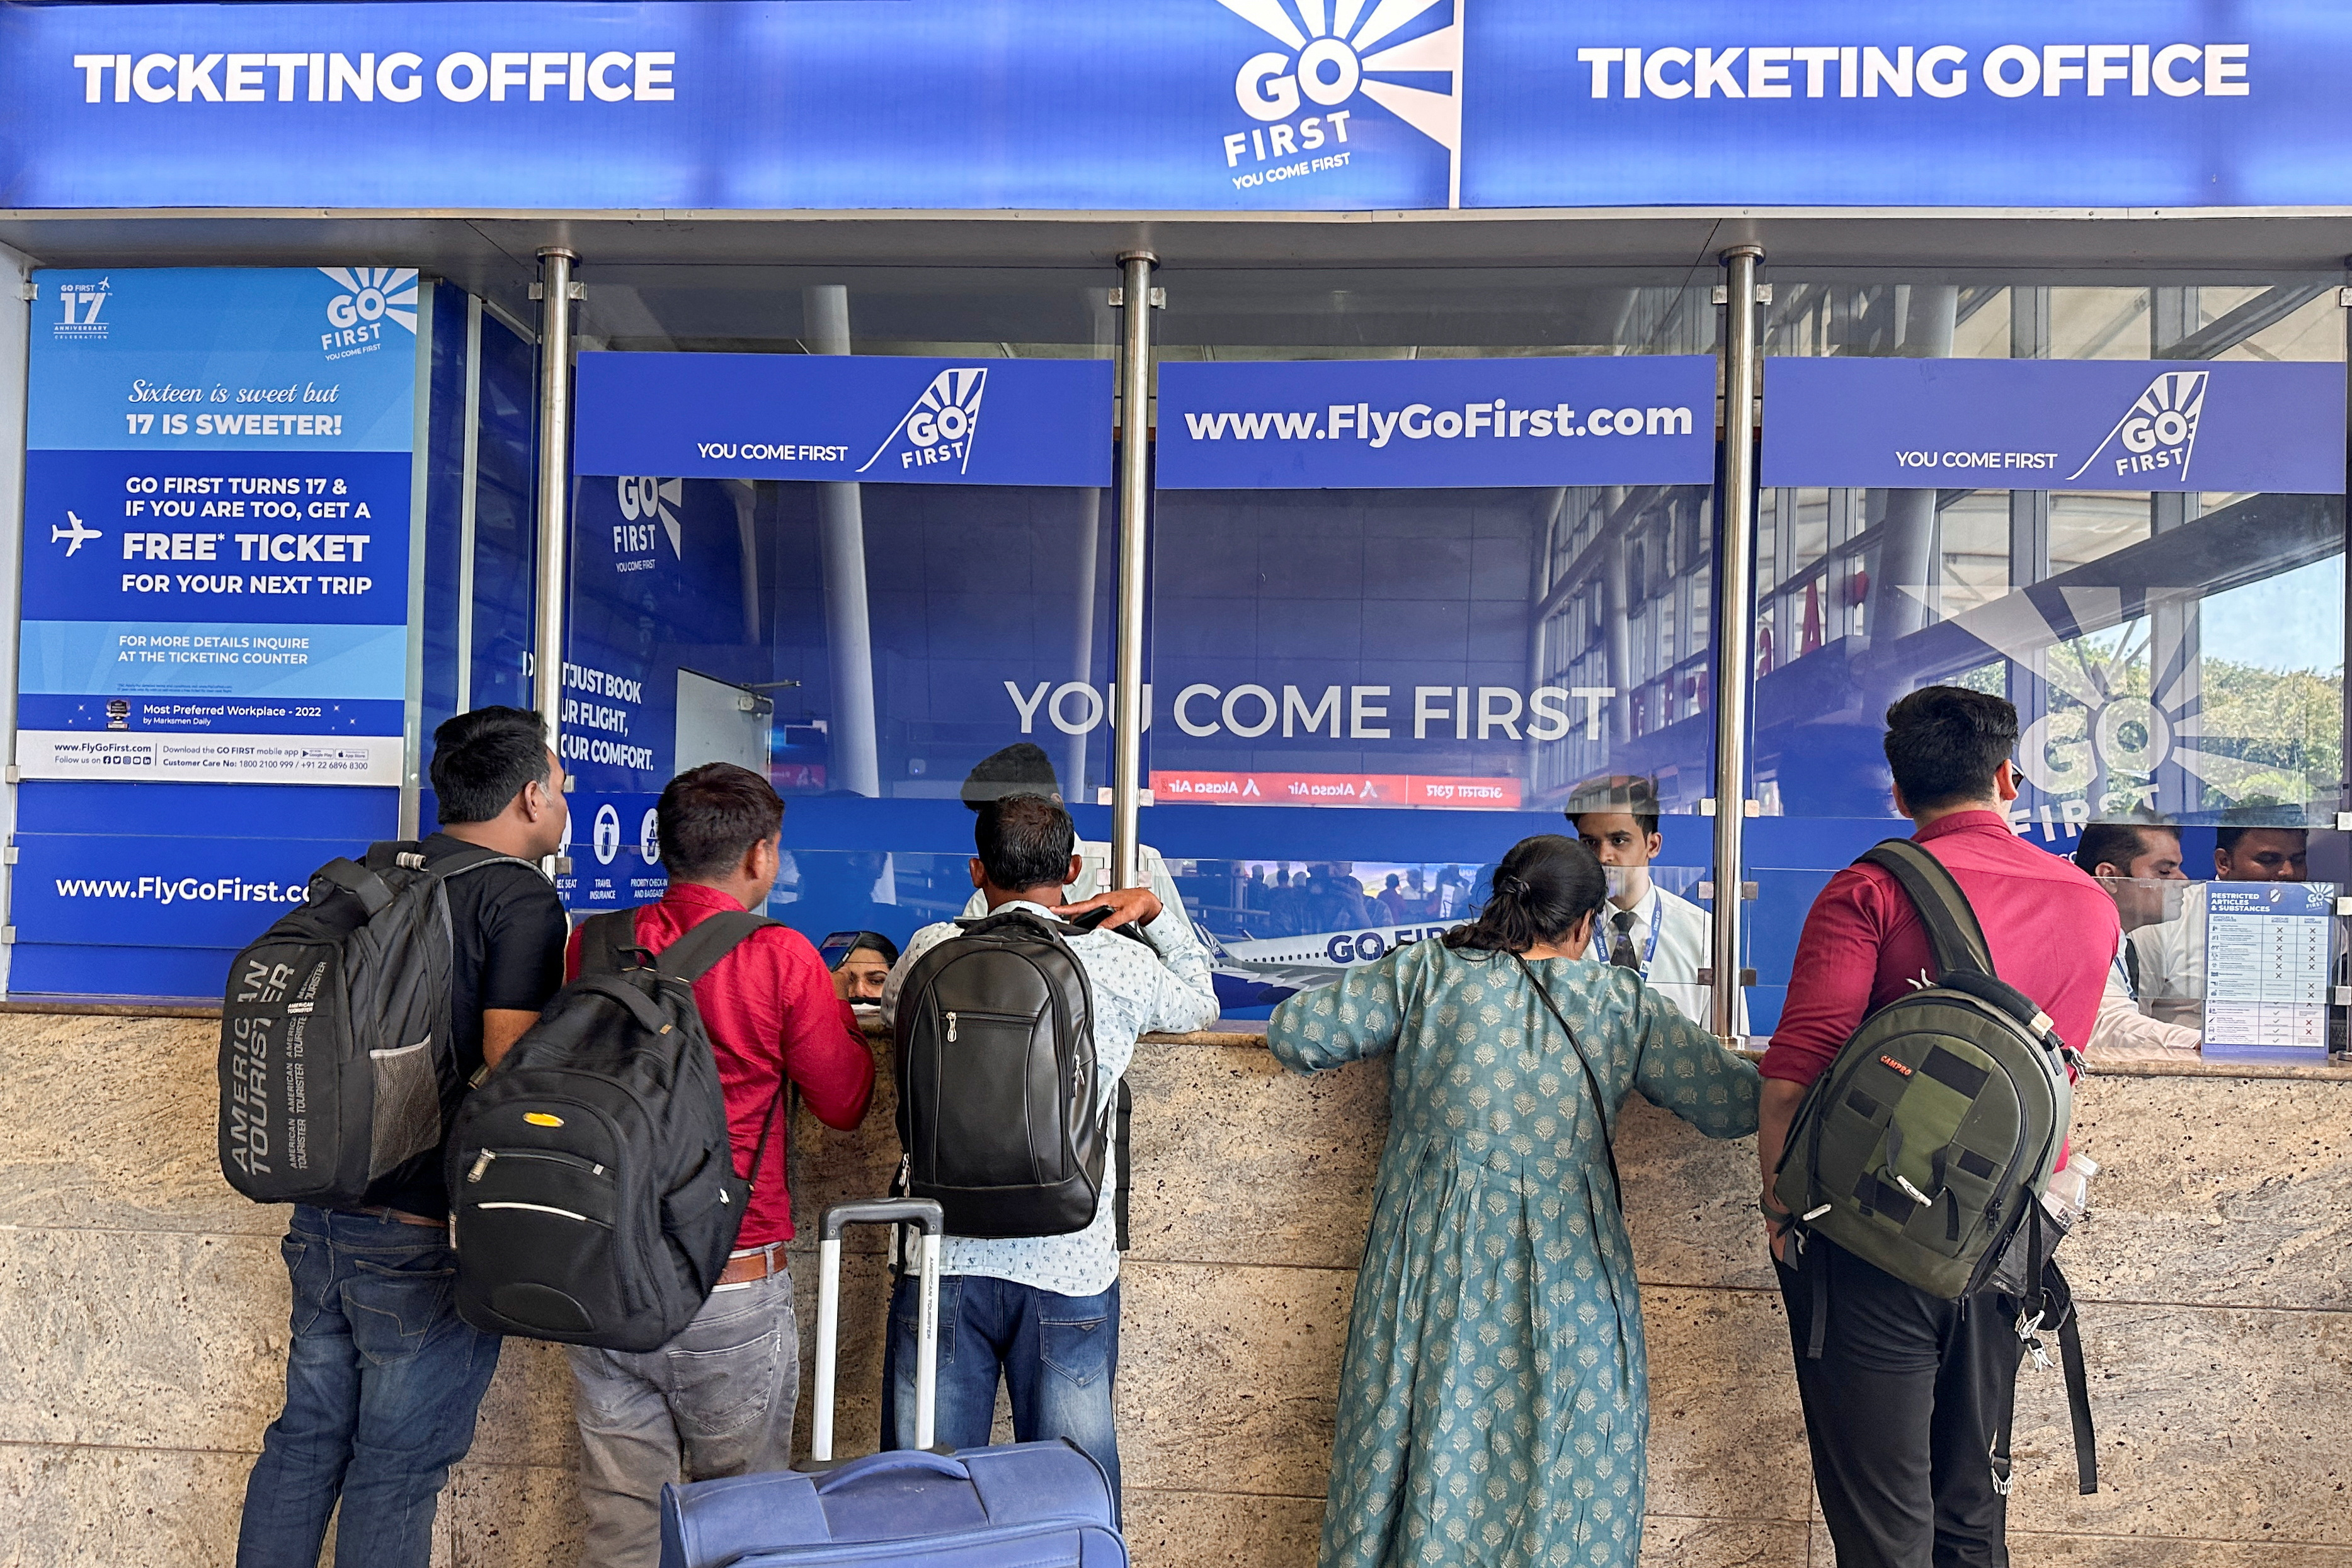 People wait to claim refunds after their flights were cancelled, from the Go First airline ticketing counter at the Chhatrapati Shivaji International Airport in Mumbai